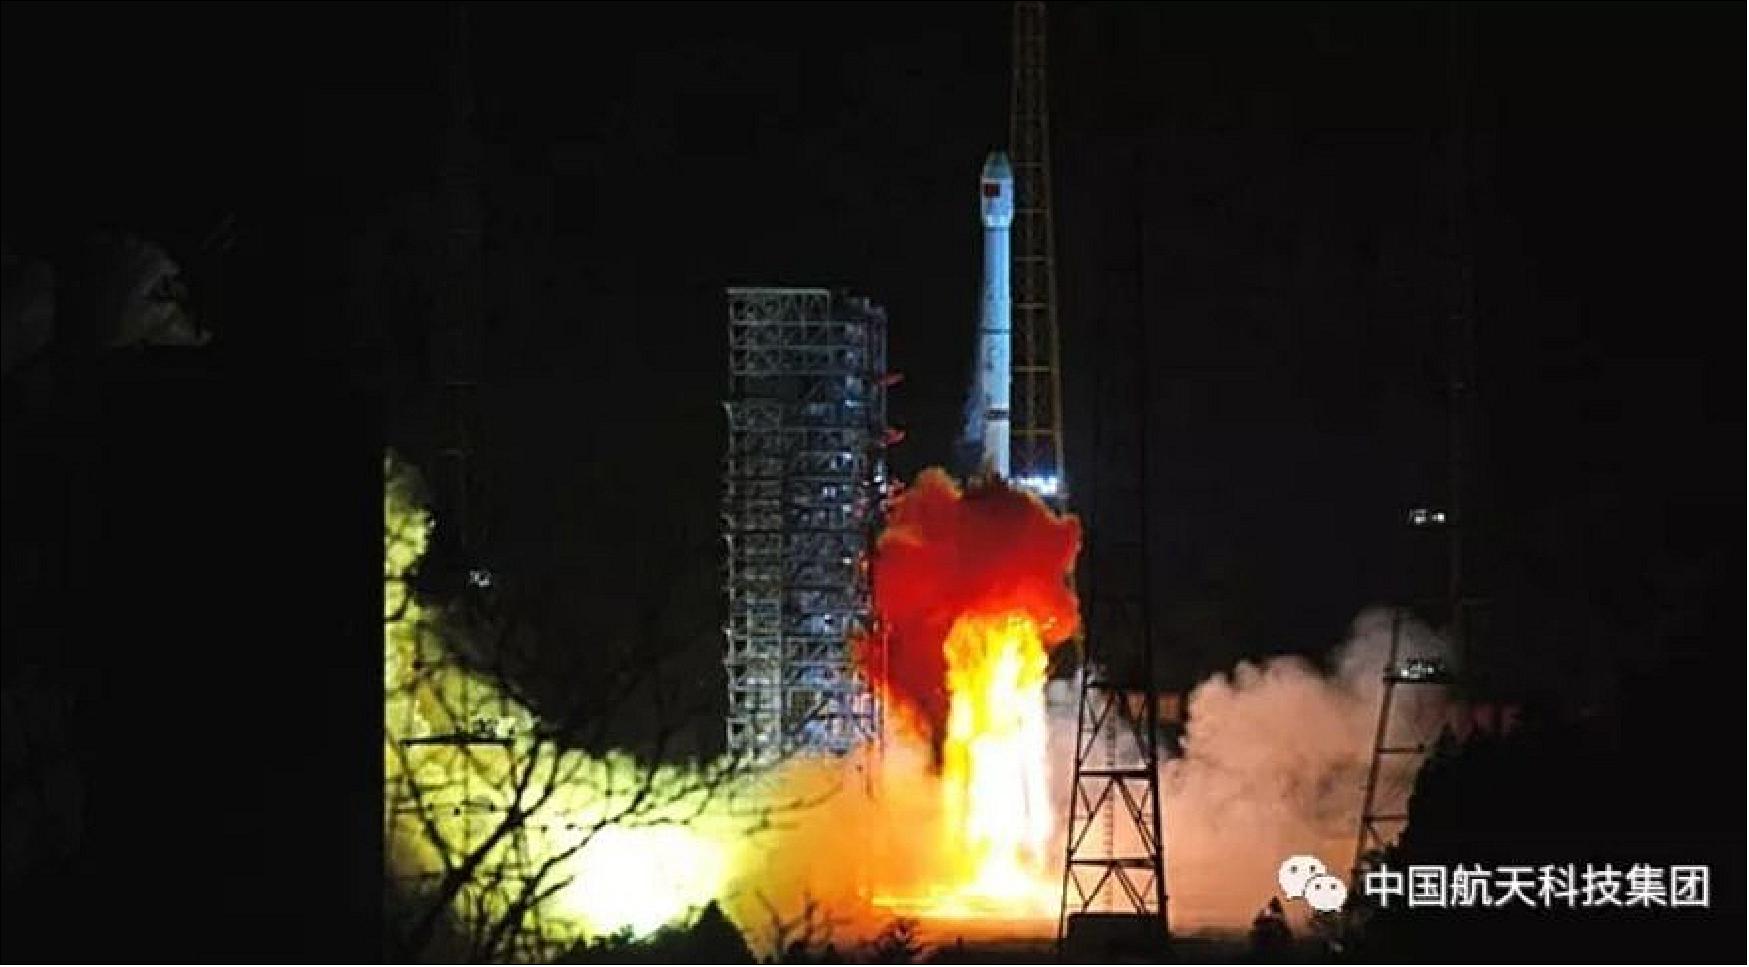 Figure 7: Launch of the Long March 3B rocket carrying Chang'e-4 on 7 December 2018 at the Xichang Satellite Launch Center in southwest China (image credit: CASC)